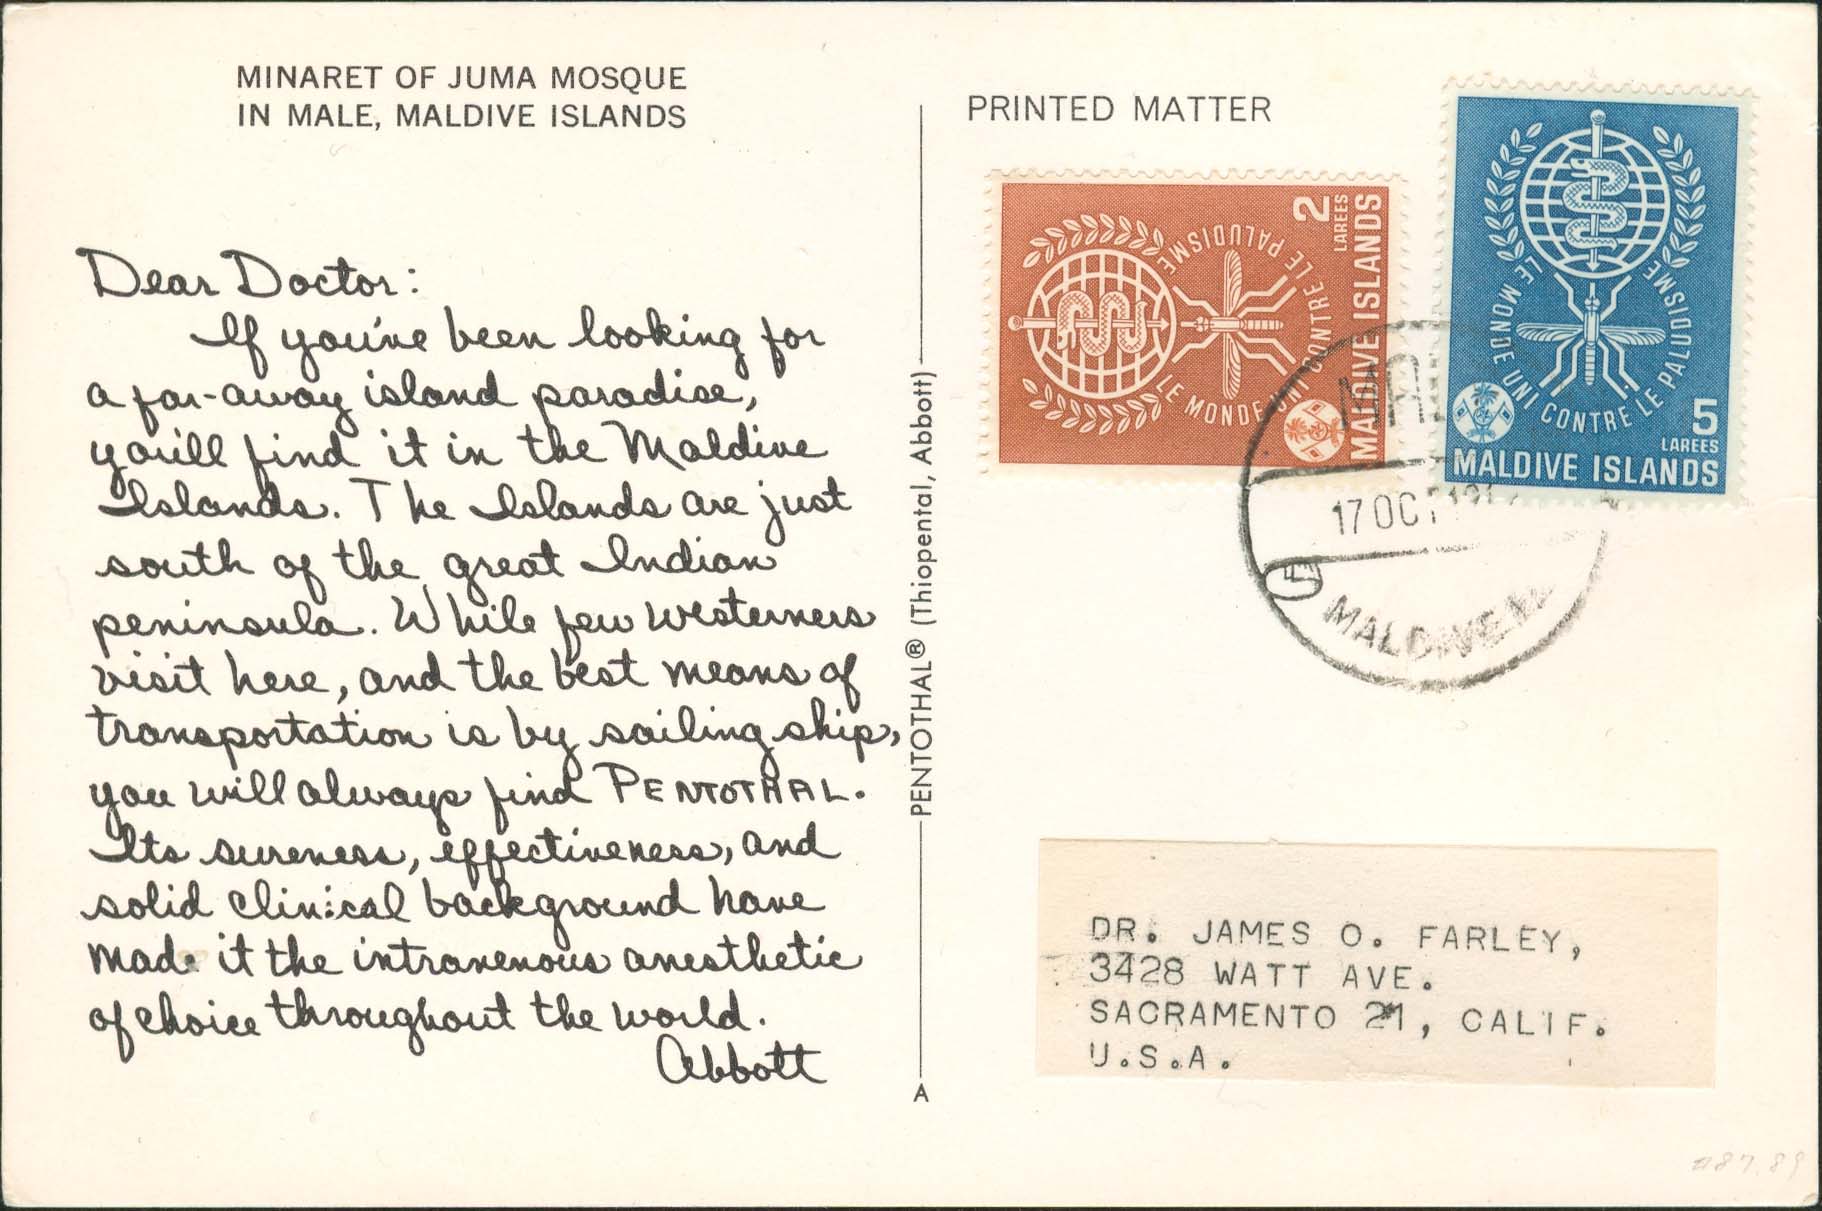 Dear Doctor Postcard - Type A - United States - 1962, Oct 17